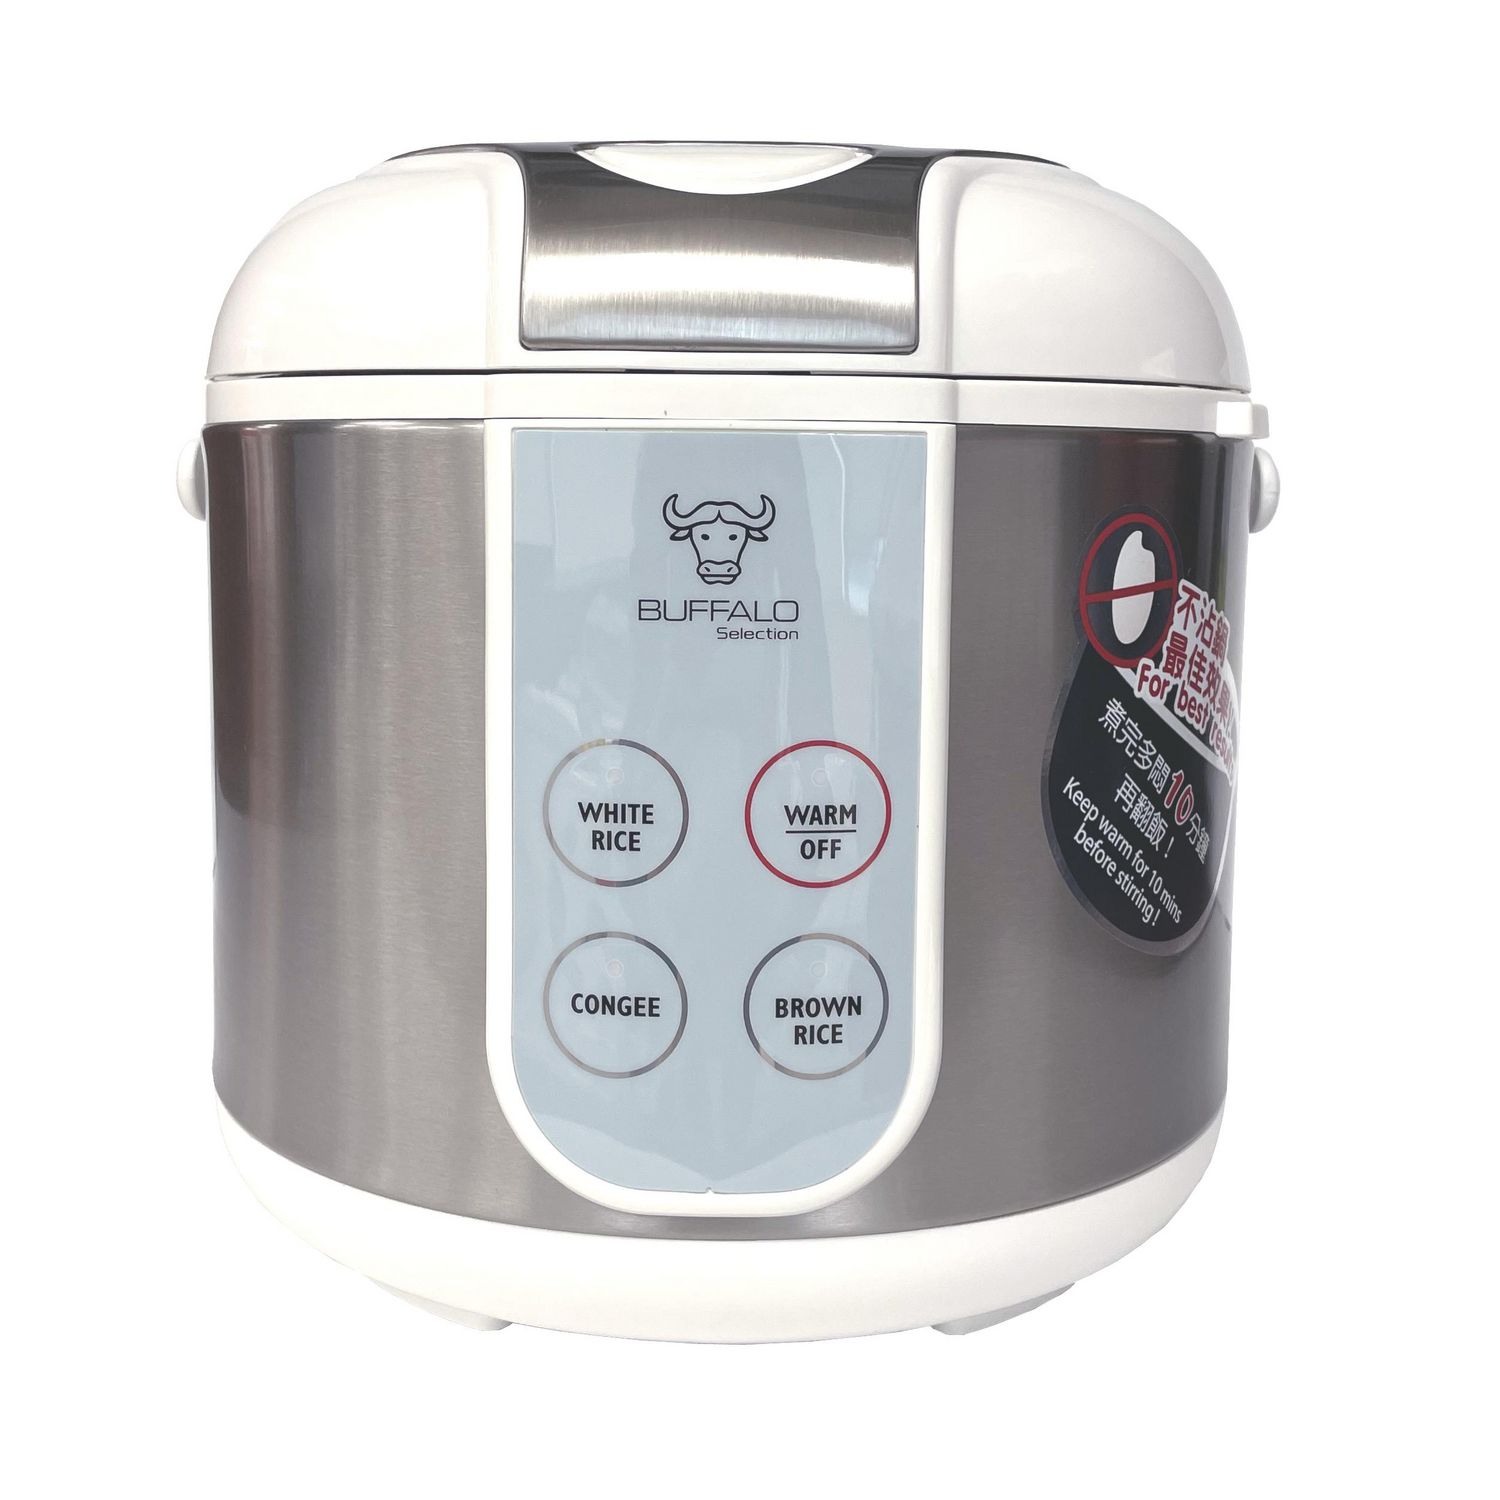 TWO Buffalo Classic Rice Cooker 1.0 Liter (5 Cups) (KWBSC10-II) – Pacific  Hoods